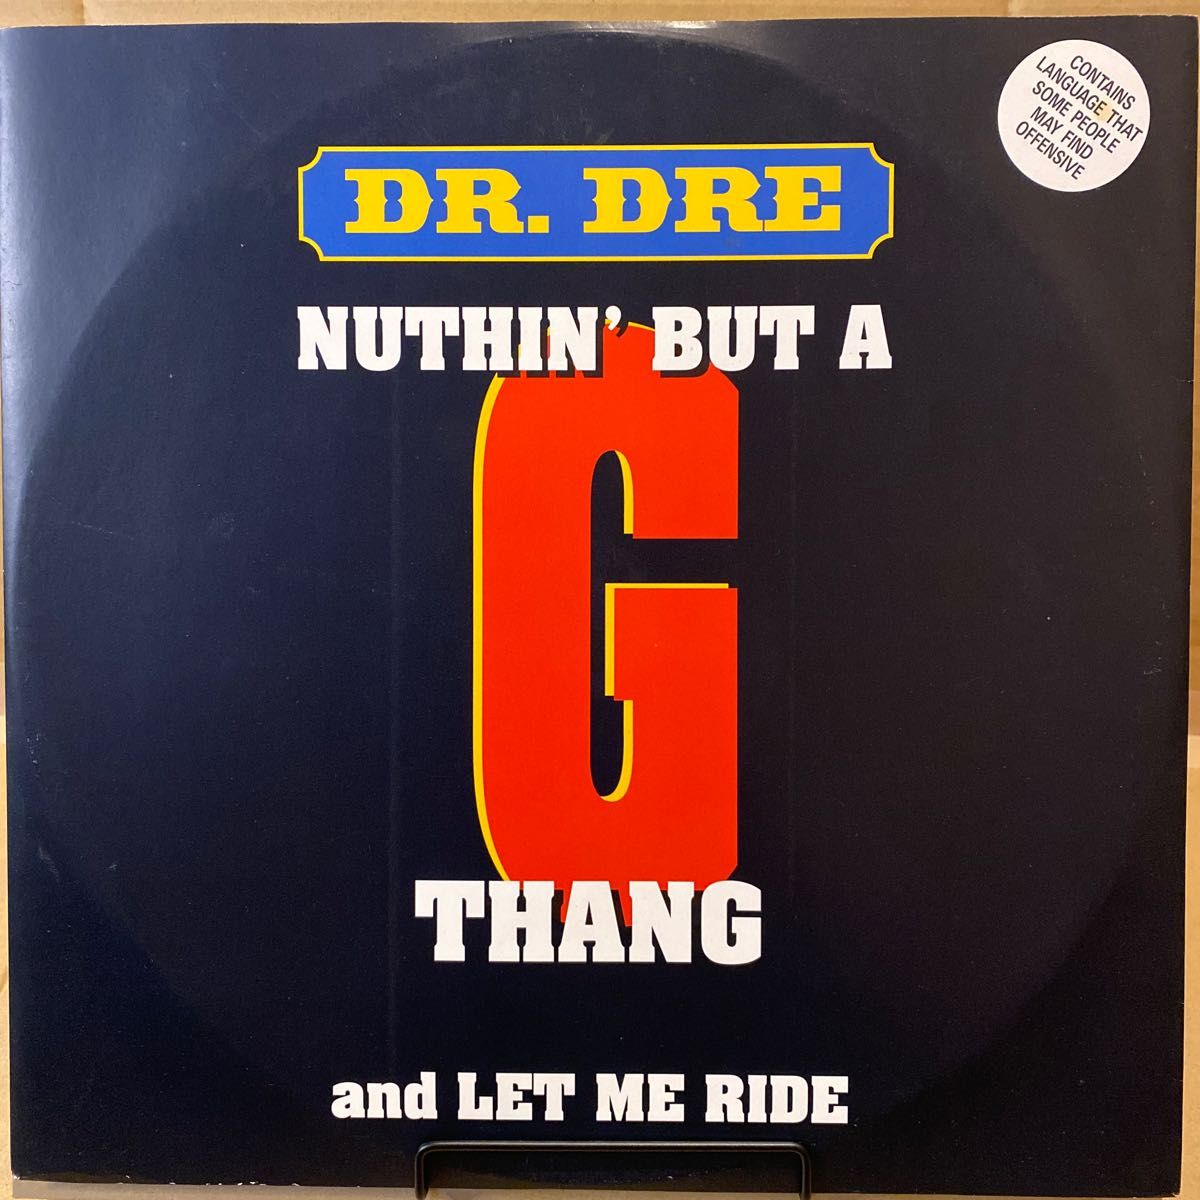 Dr. Dre / Nuthin’ But A Thang , Let Me Ride 12レコードUK盤